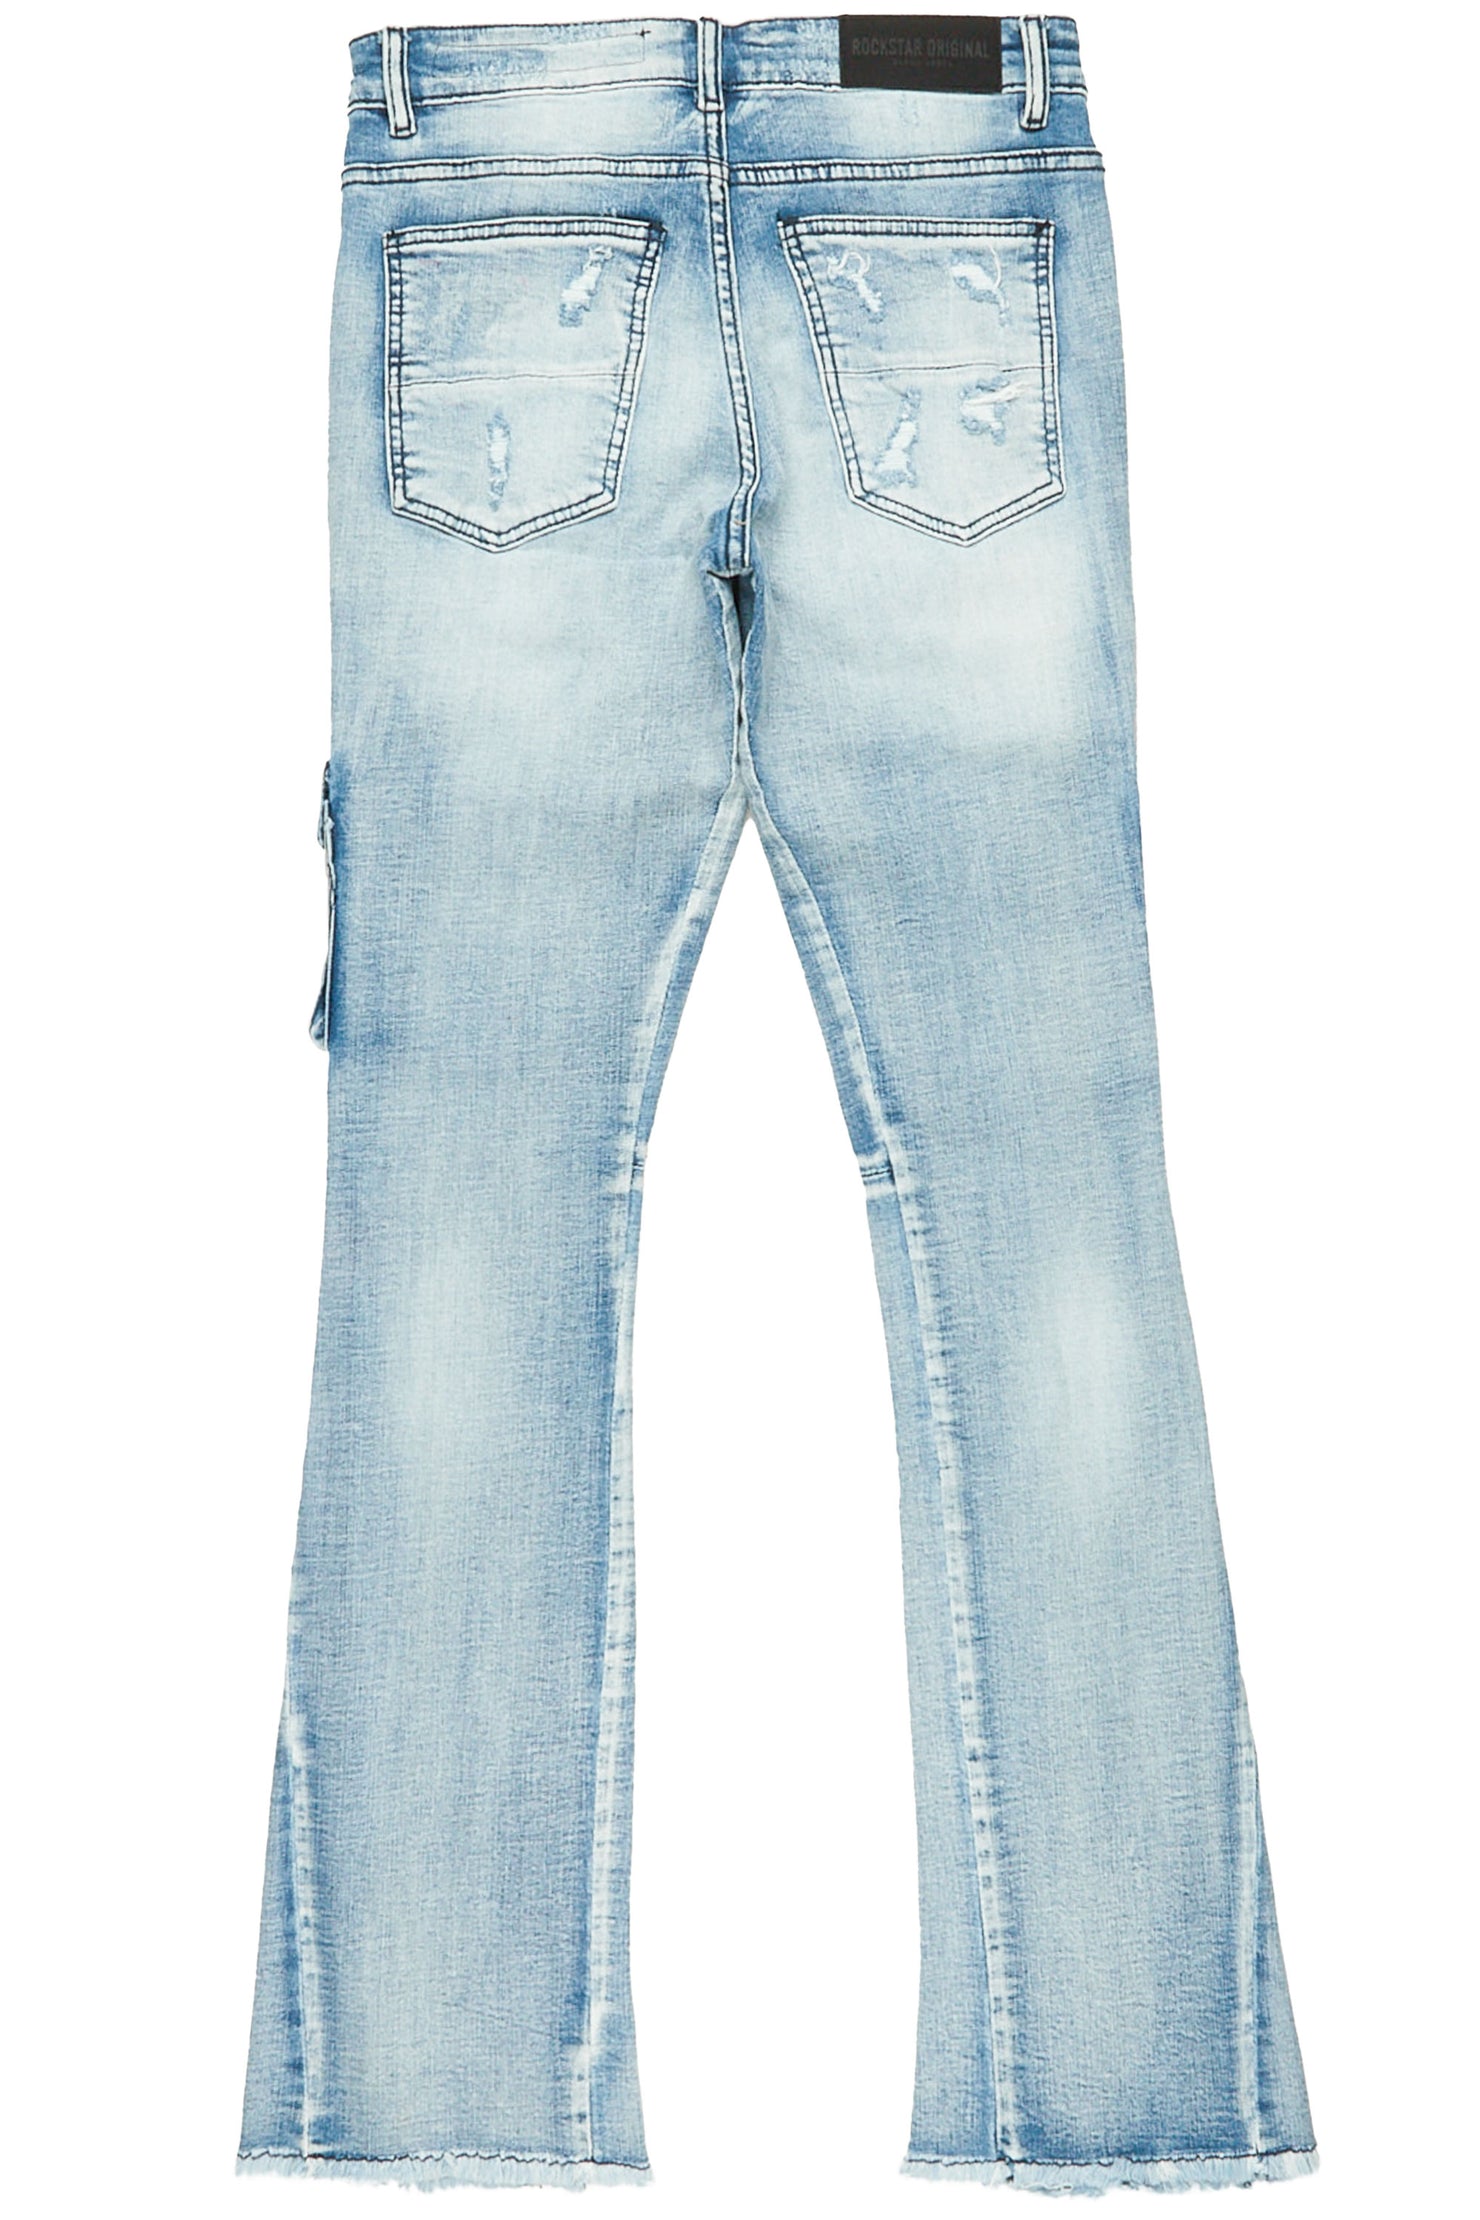 Zaid Blue Stacked Flare Jean